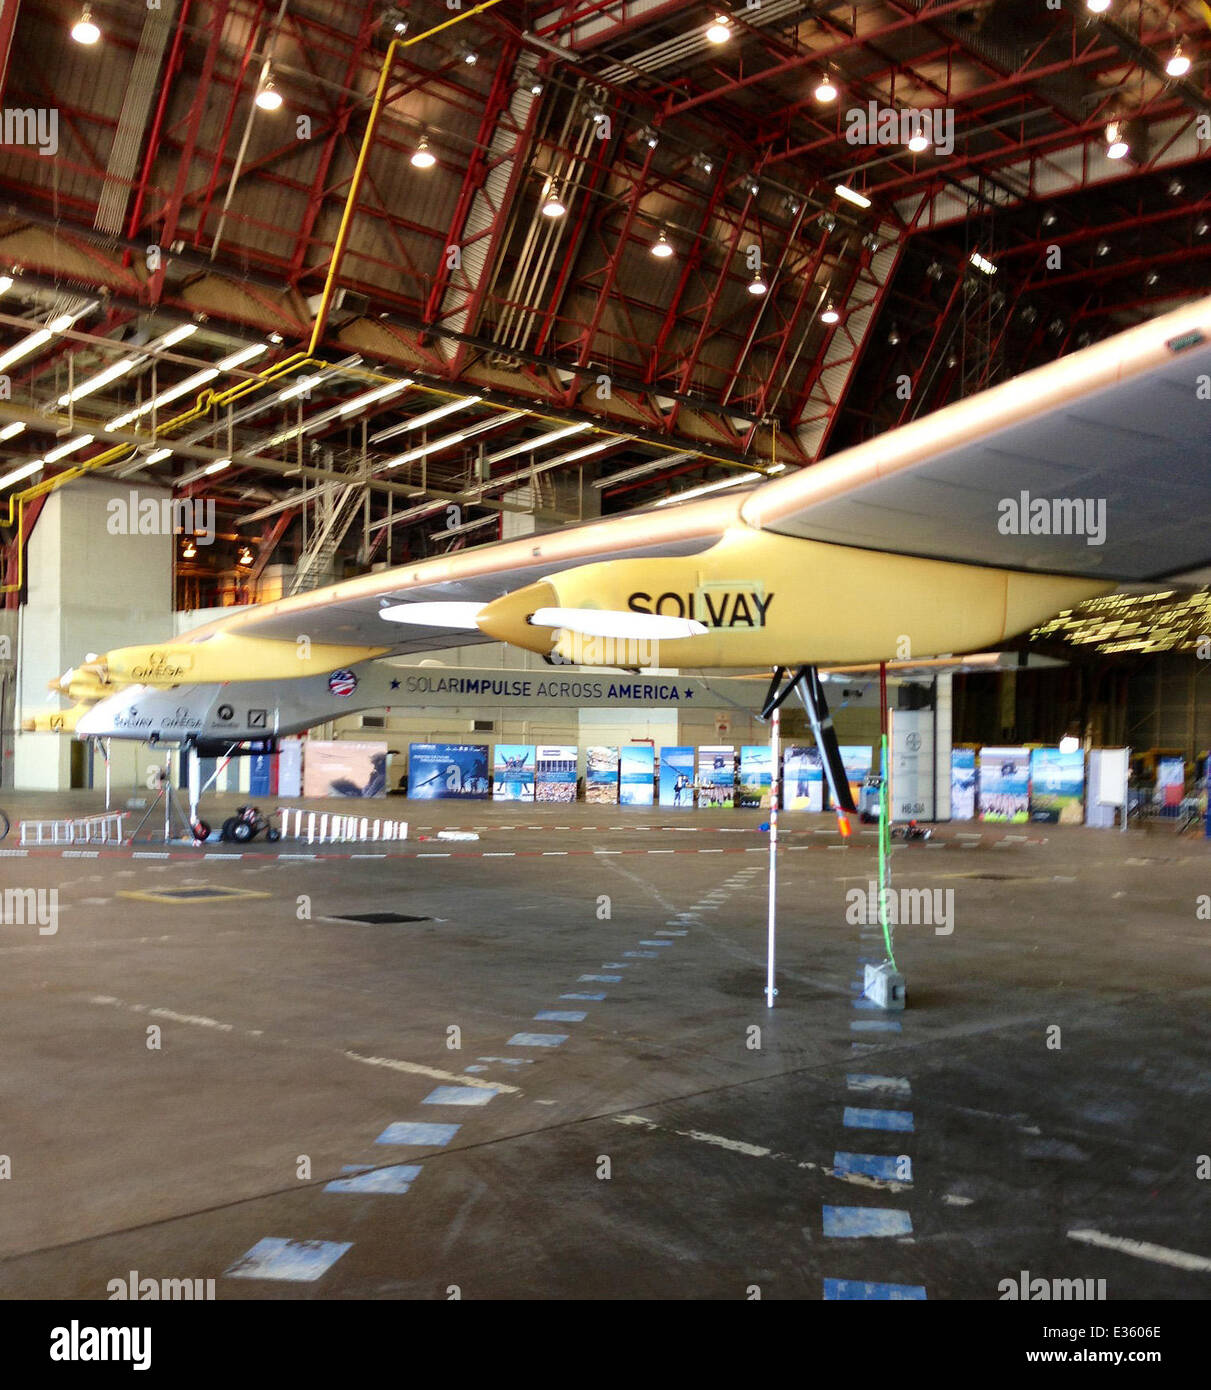 The Solar Impulse no-fuel plane stationed at New York’s John F. Kennedy International Airport after completing the final leg of a history-making cross-country flight on Saturday night (6July13) from Sky Harbor International Airport in Phoenix  Featuring: Stock Photo